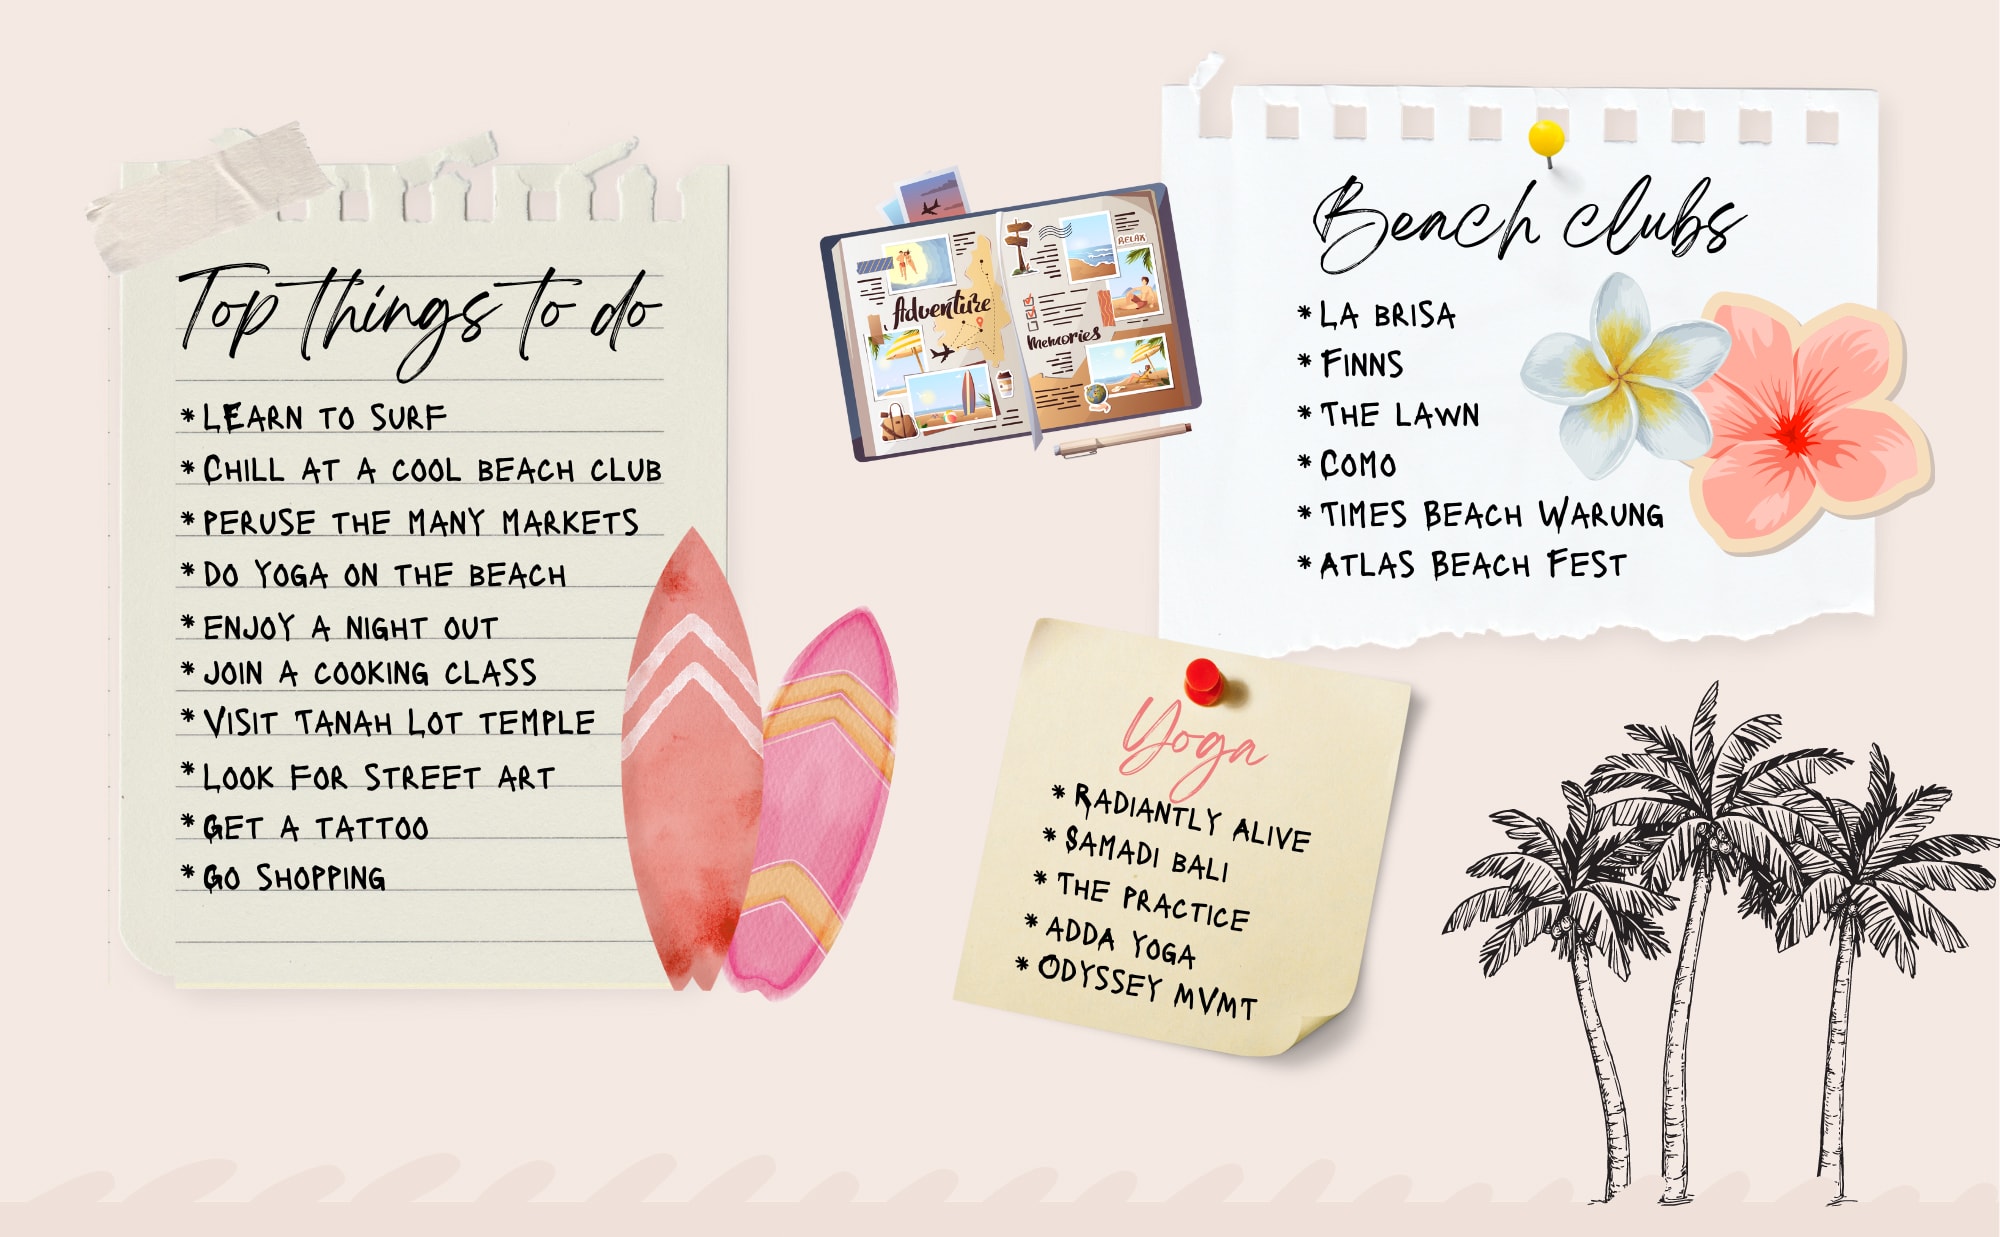 Canggu Bali for digital nomads infographic - Top things to do